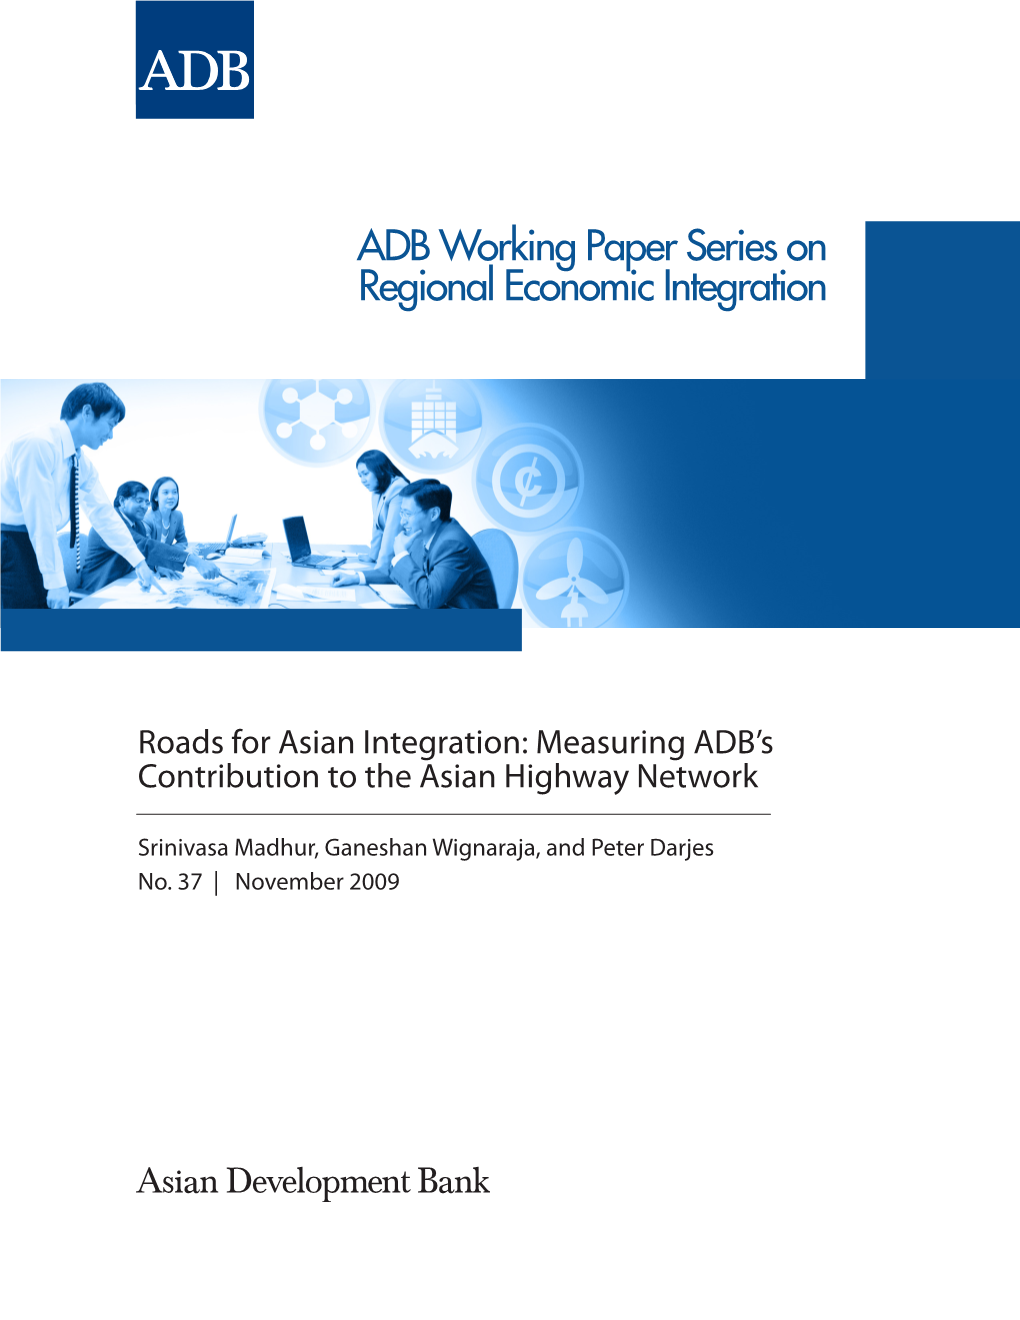 Roads for Asian Integration: Measuring ADB's Contribution to the Asian Highway Network